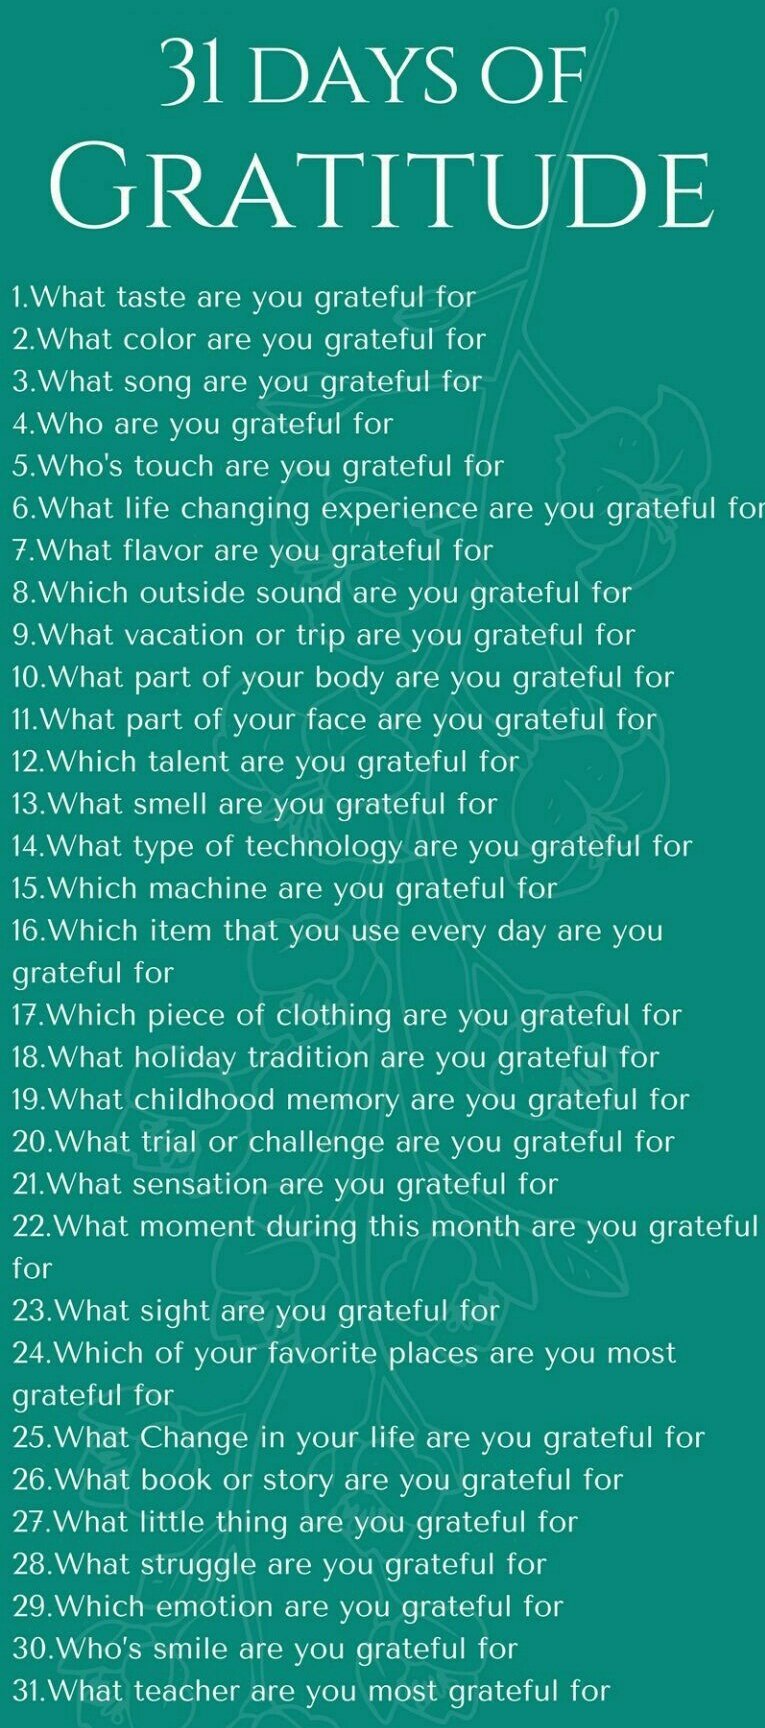 Priya Buldeo 🦋 On Twitter: "31 Days Of Gratitude Challenge: A Thread. 🙏  What Are You Grateful For? Https://T.co/Xcx0M0Kvz4" / Twitter